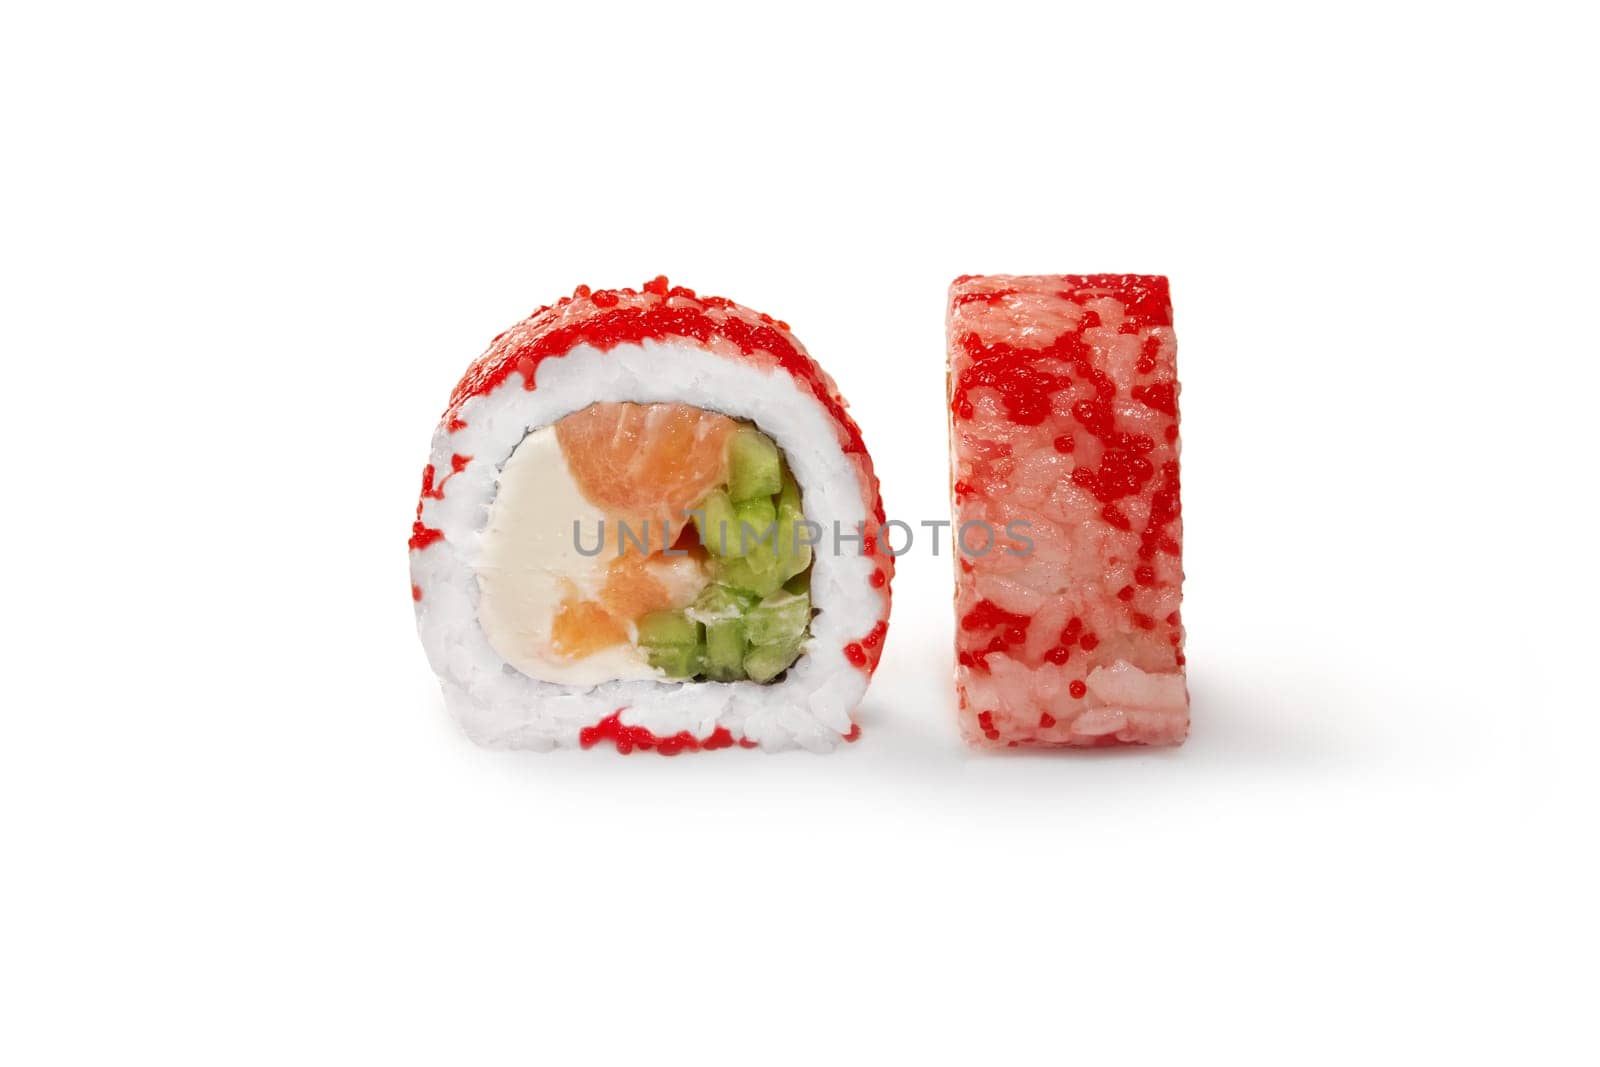 California sushi roll with salmon coated with red tobiko by nazarovsergey